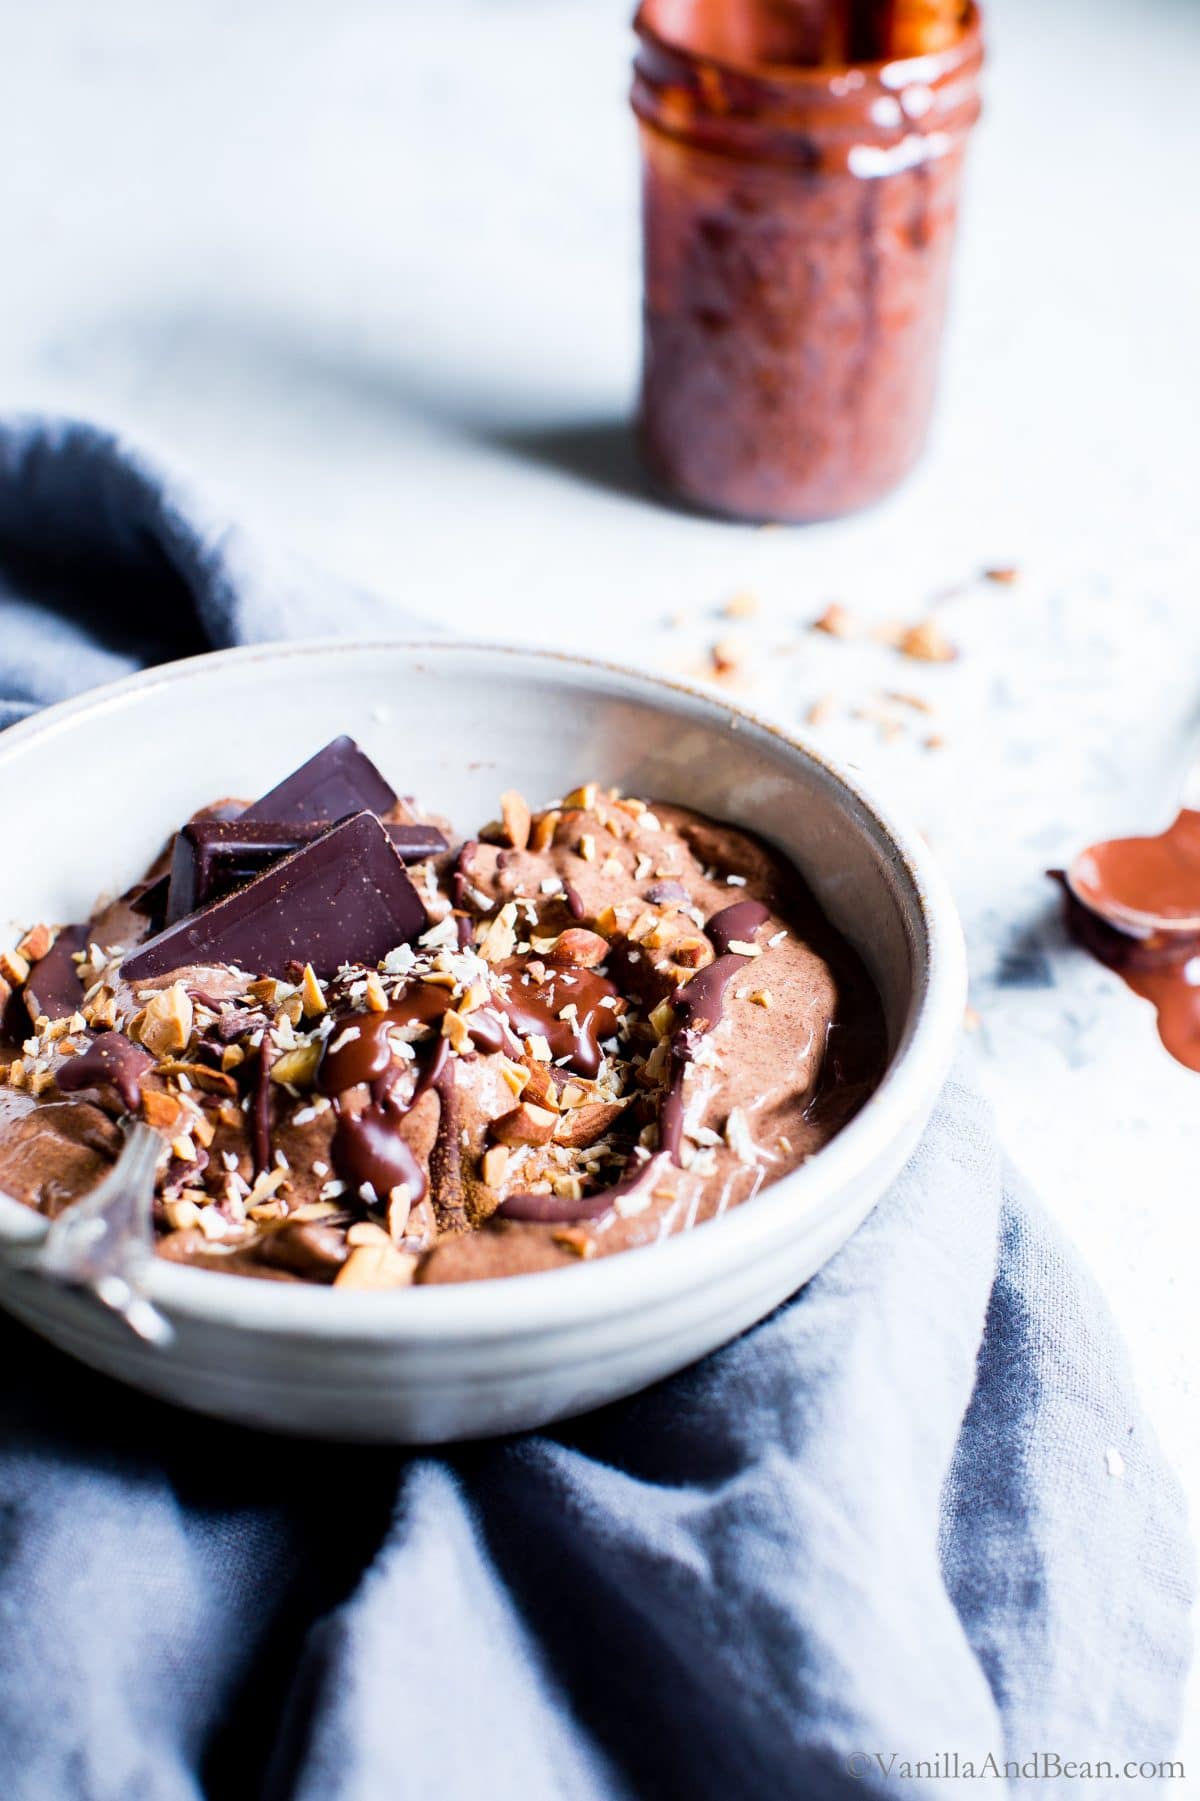 Mexican Chocolate Almond Nice Cream Bowls with a spoon and drizzled with chocolate ready for sharing.